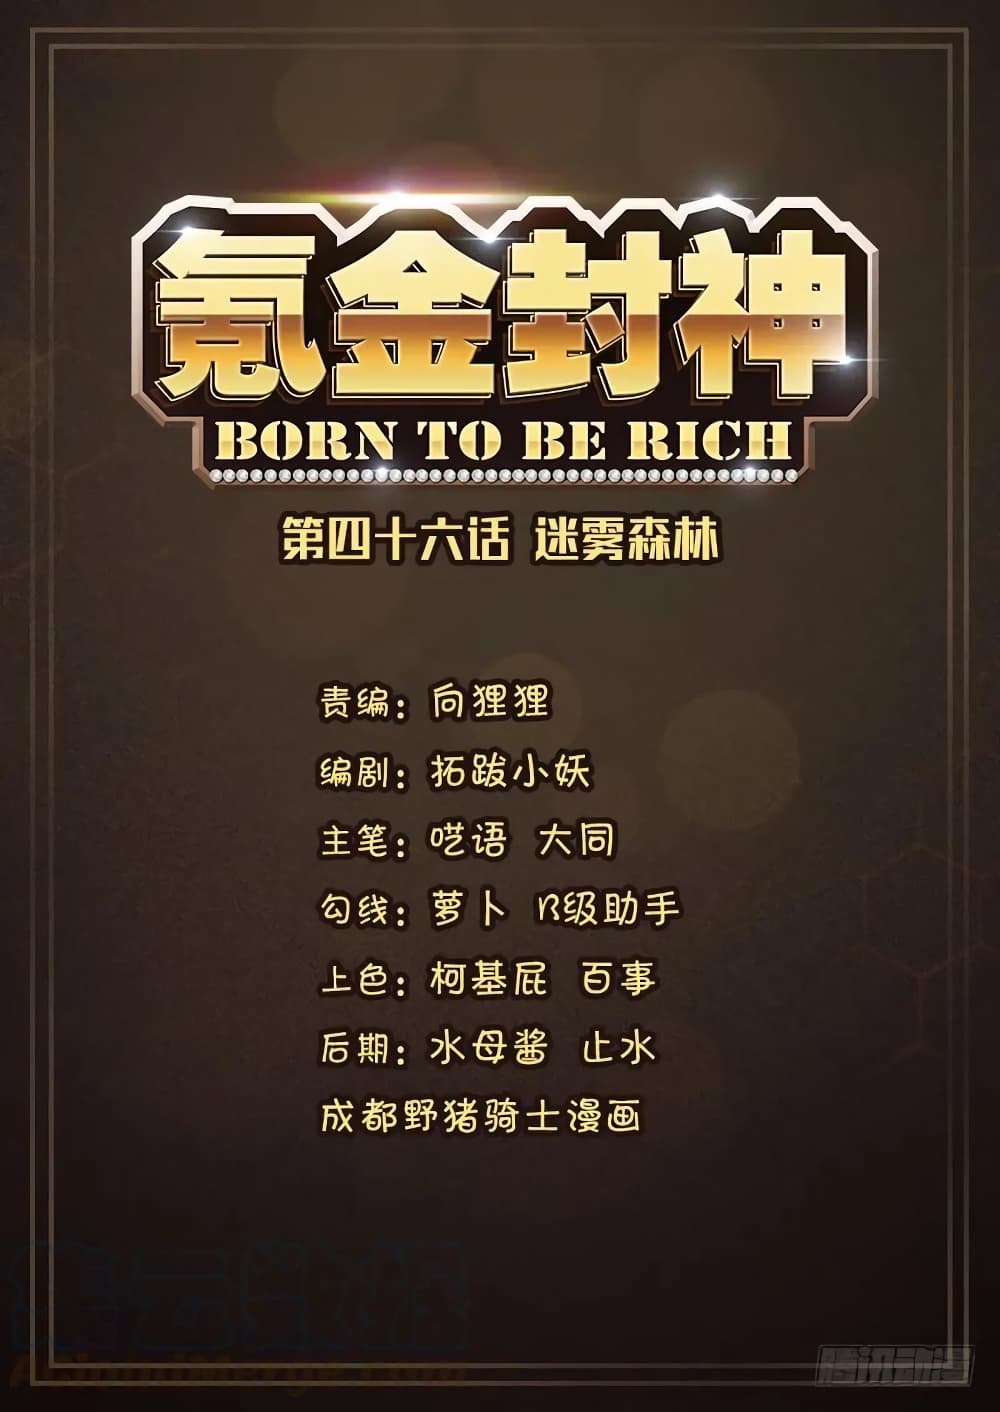 Born To Be Rich 47 (2)